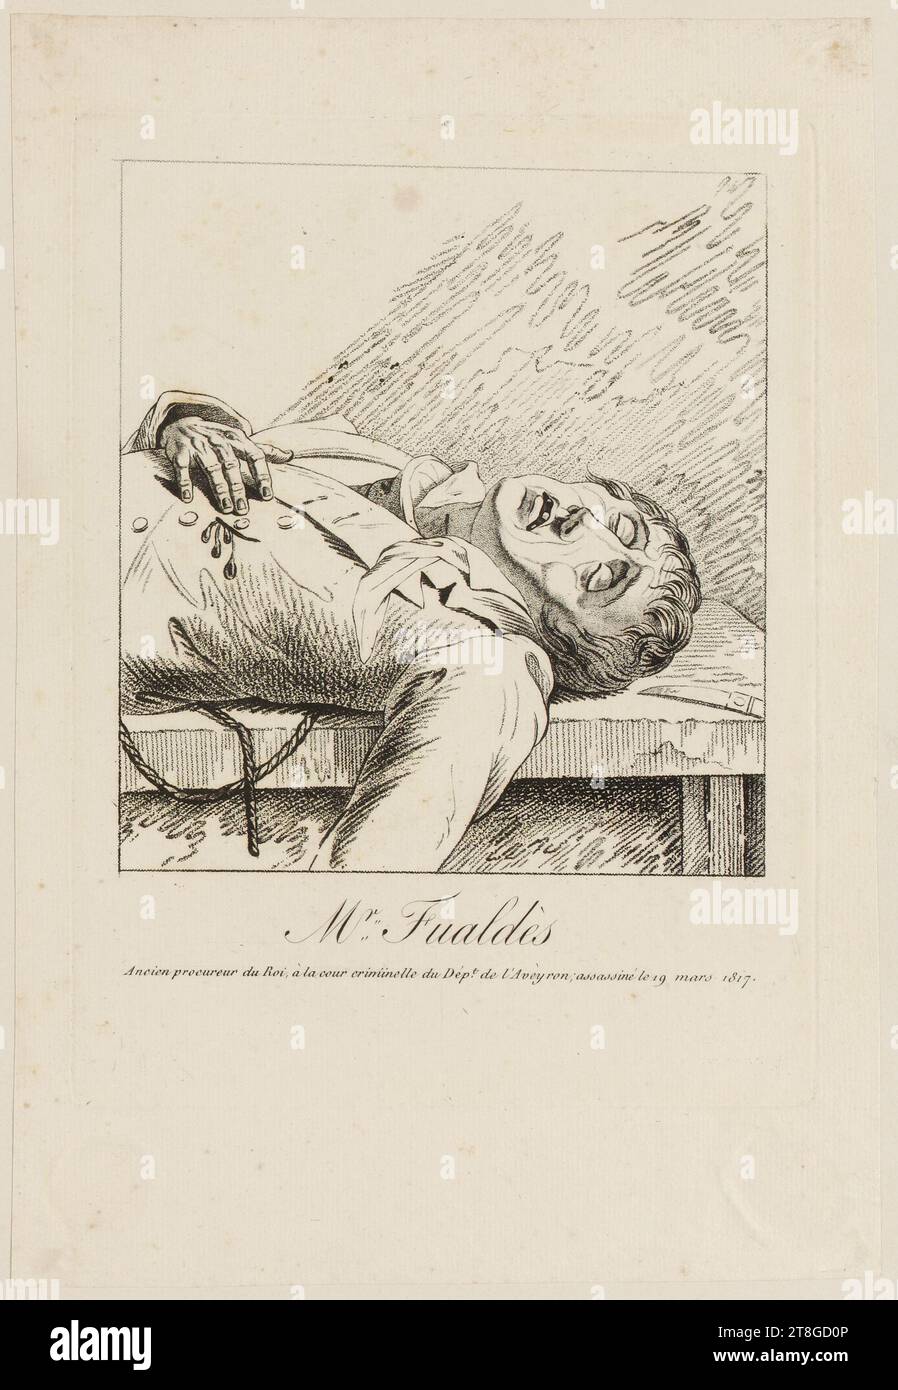 Mr. Fualdes, Former Crown Prosecutor at the Criminal Court of Dept. from Aveyron; murdered March 19, 1817, Engraver, Between 1817 and 1819, Print, Graphic arts, Print, Engraving, Dimensions - Work: Height: 30 cm, Width: 20.6 cm, Dimensions - Mounting:, Height: 48.5 cm, Width: 31.9cm Stock Photo